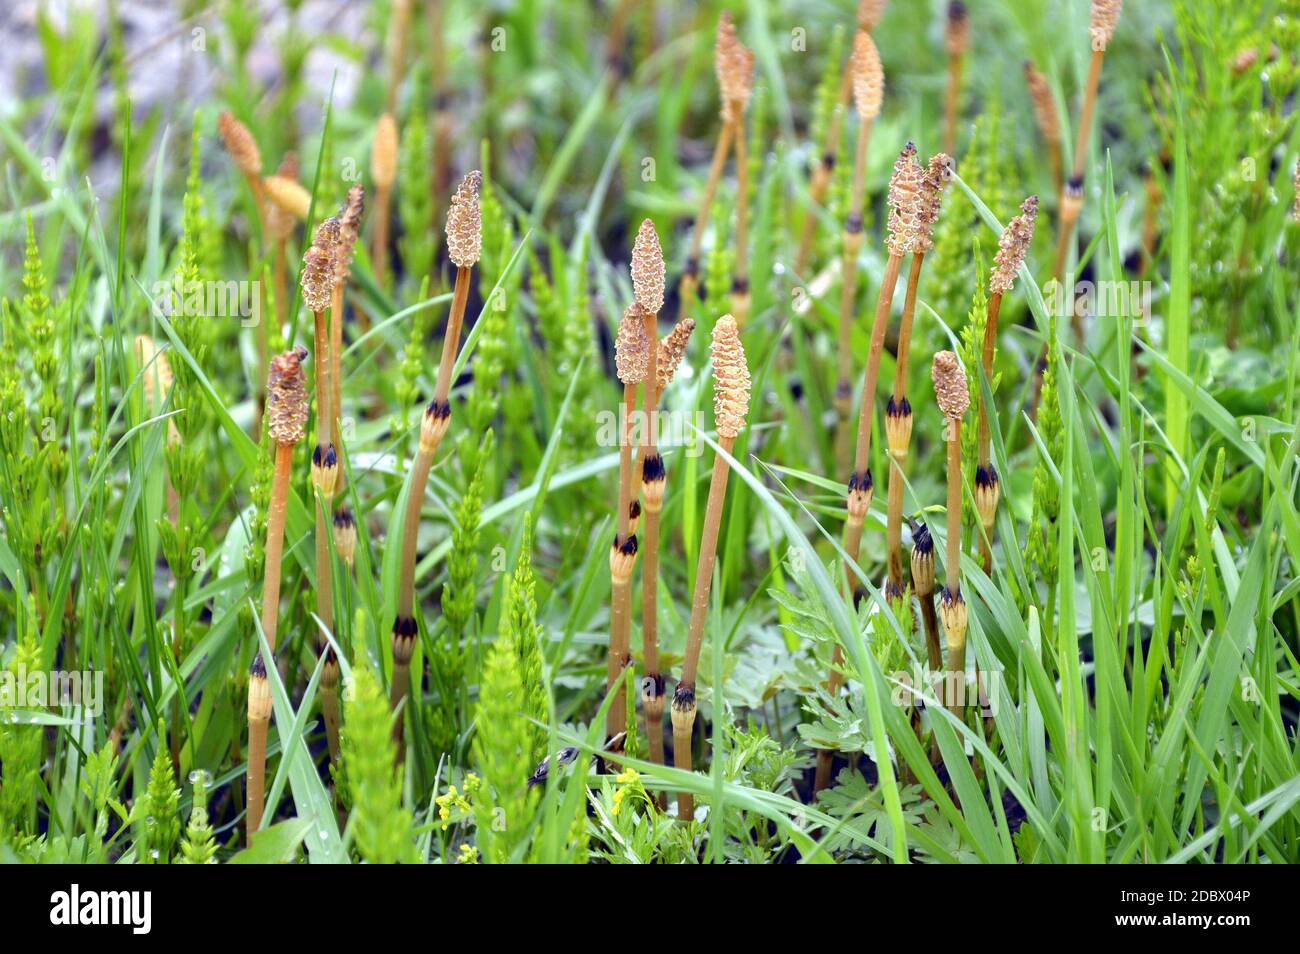 Equisetum (horsetail, marestail) with strobilus in green grass Stock Photo